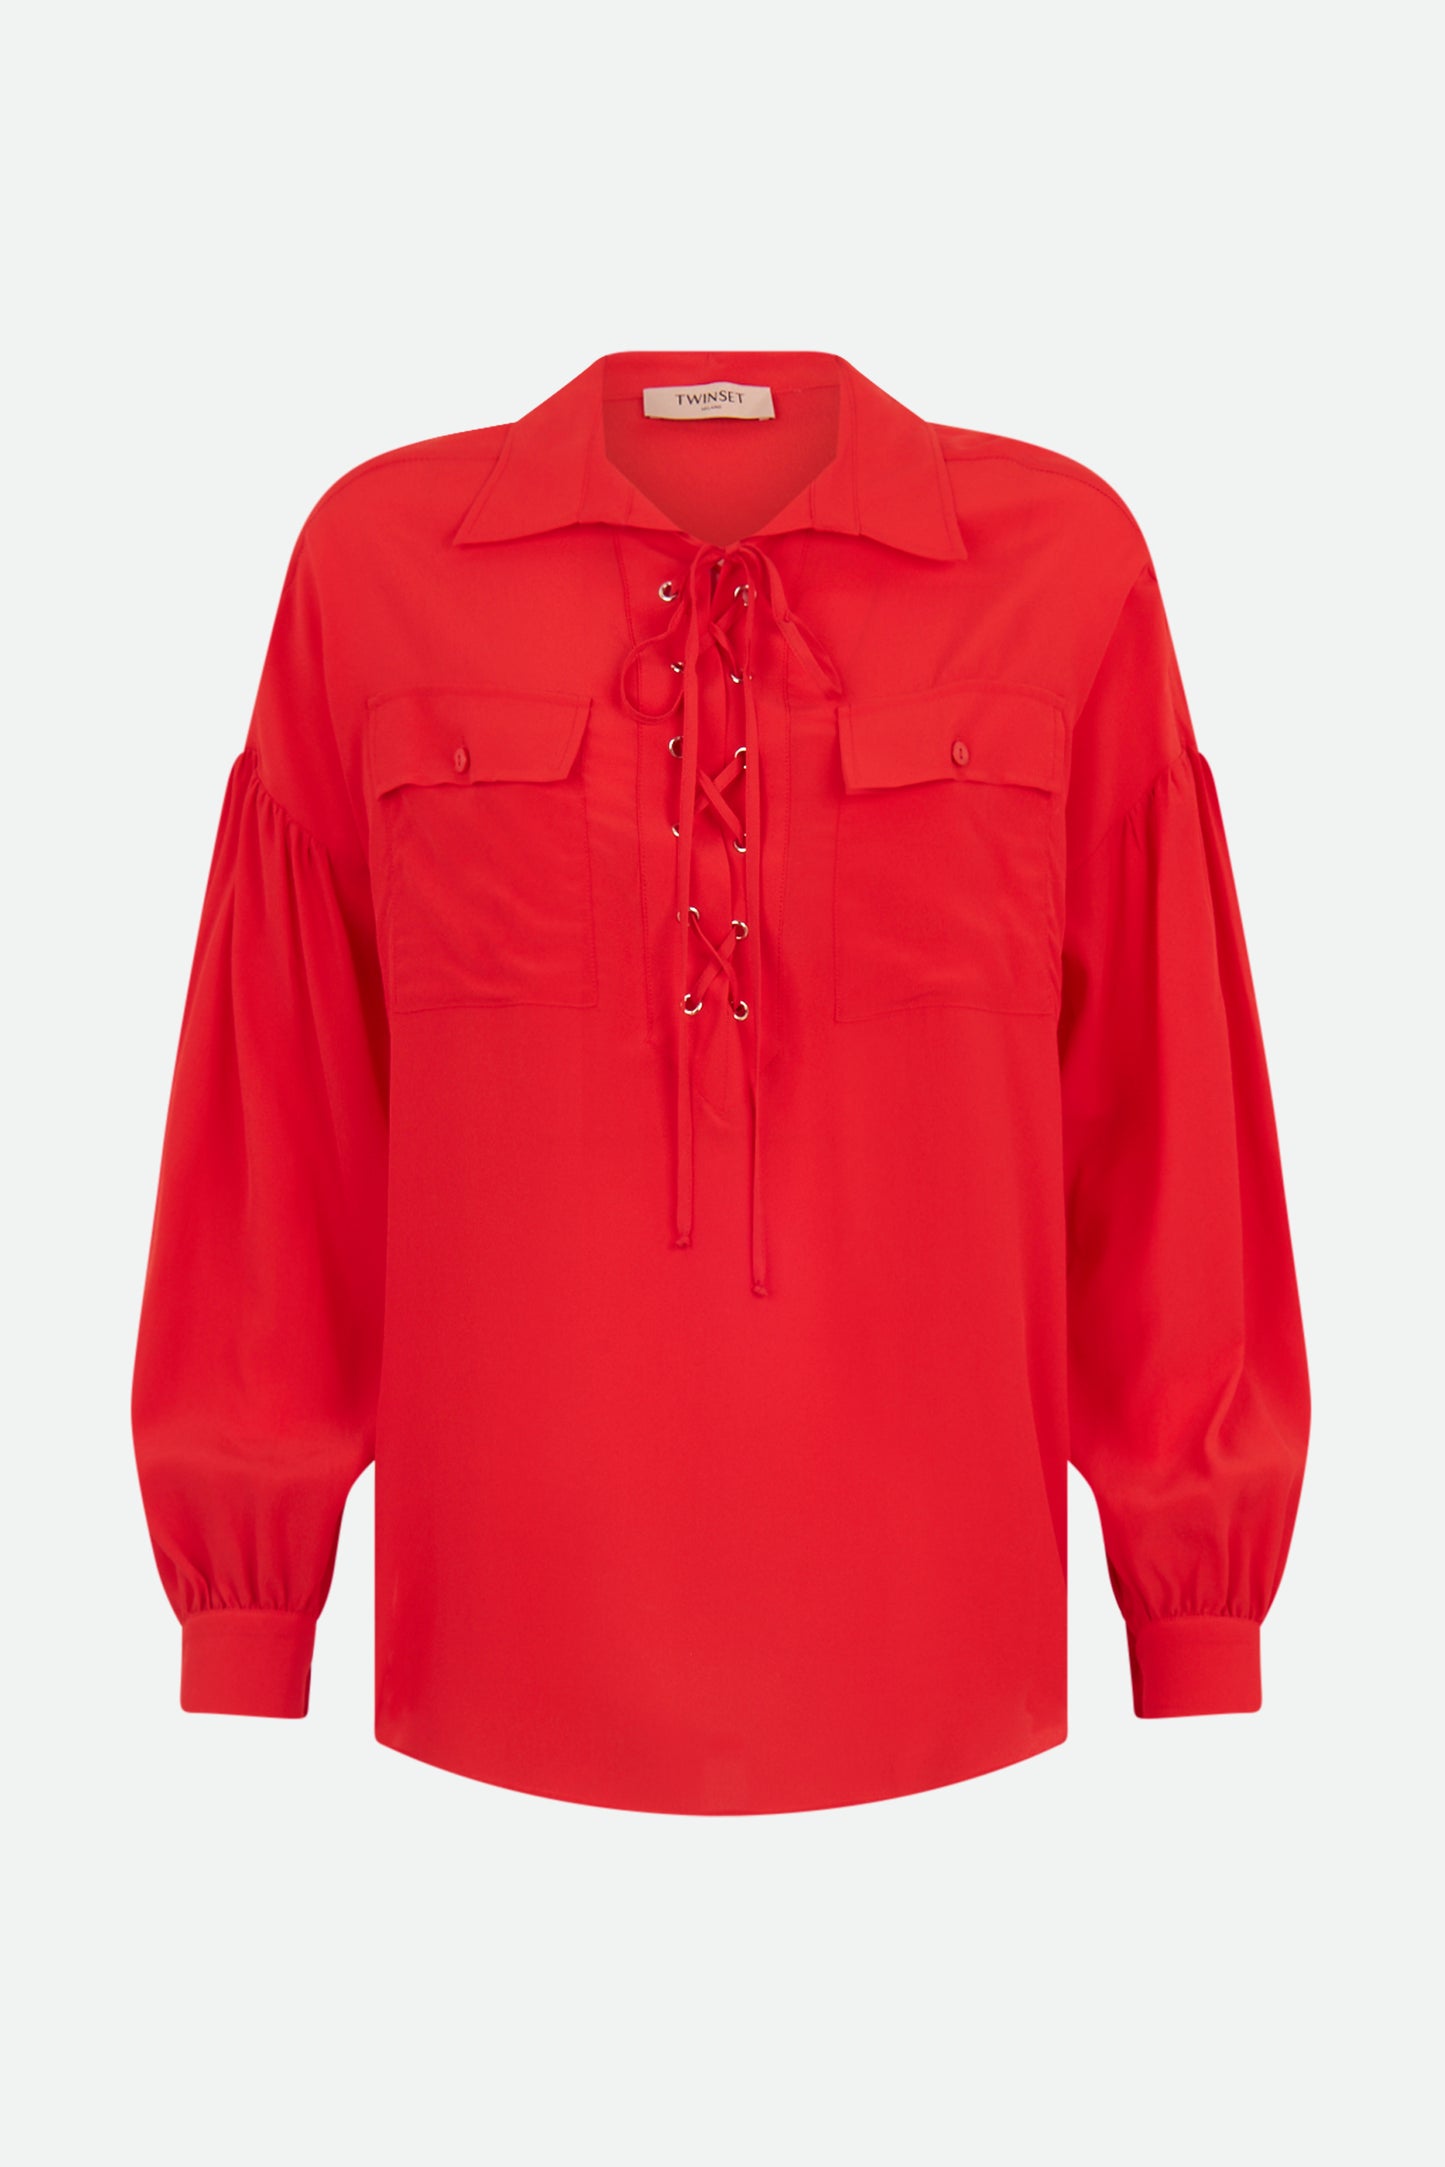 Twinset Red Shirt